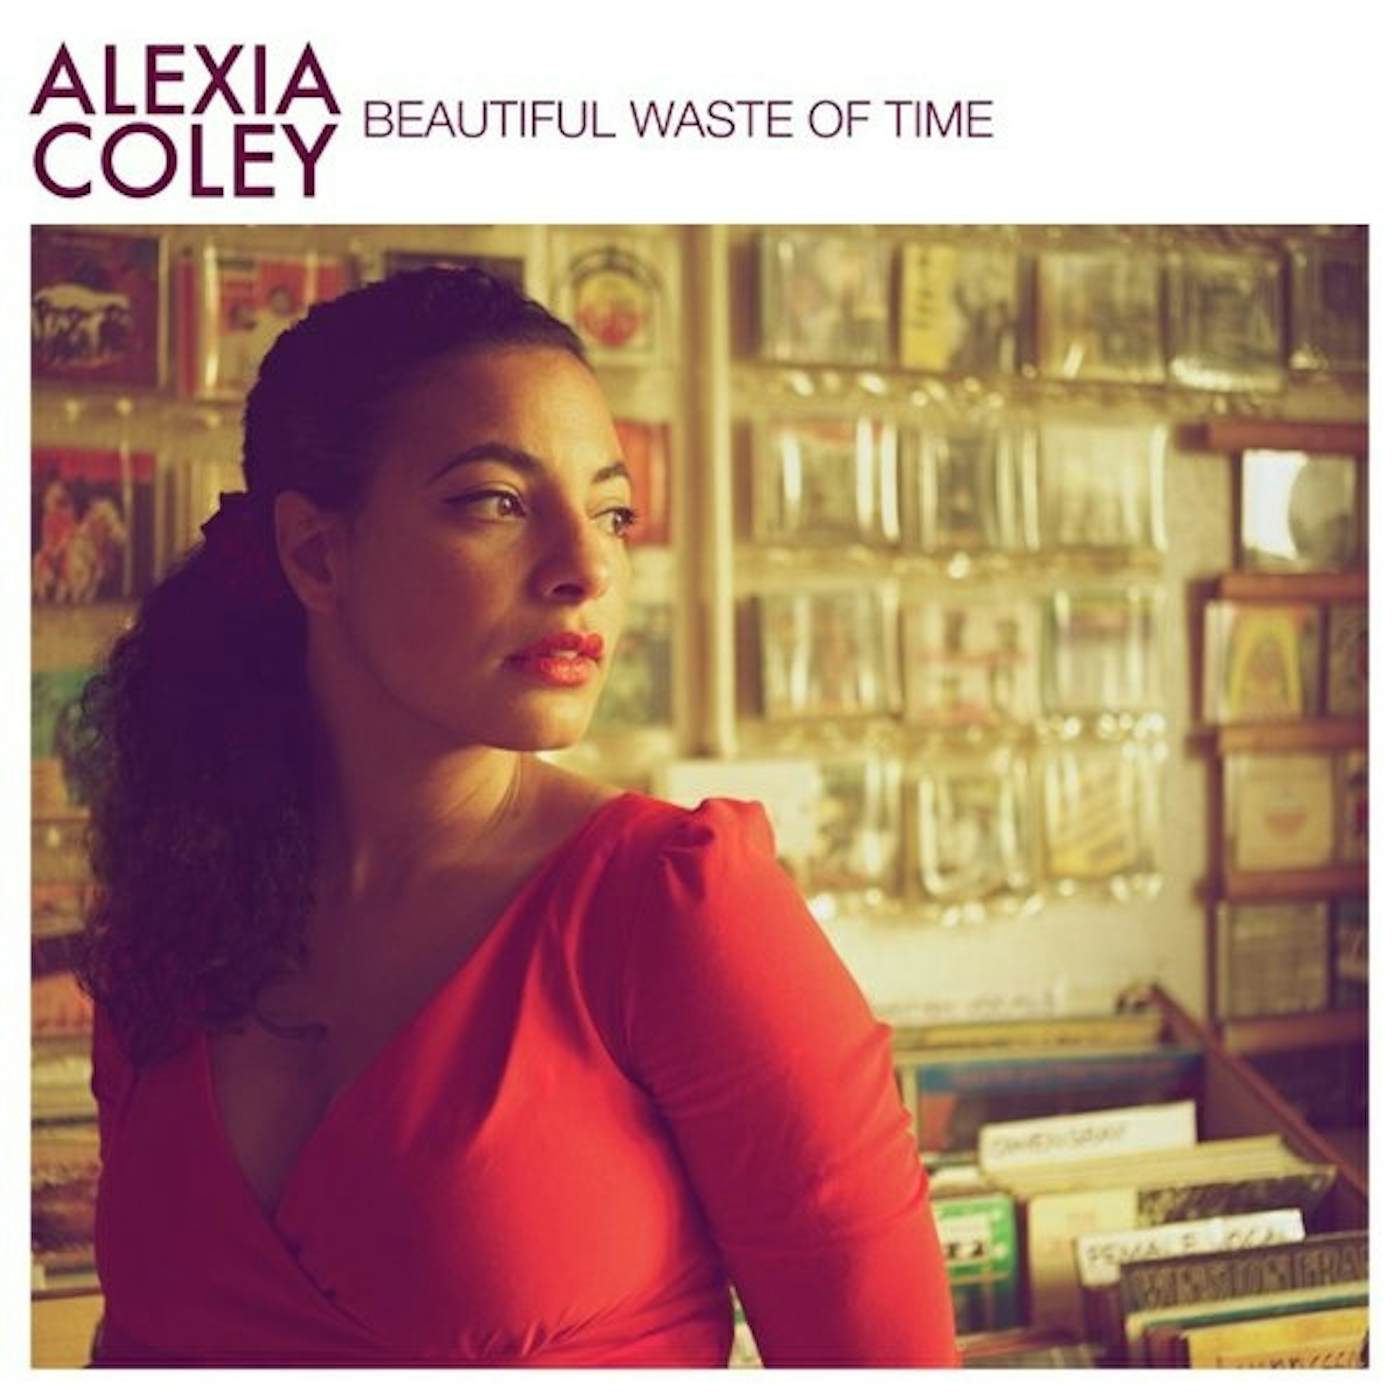 Alexia Coley BEAUTIFUL WASTE OF TIME Vinyl Record - UK Release